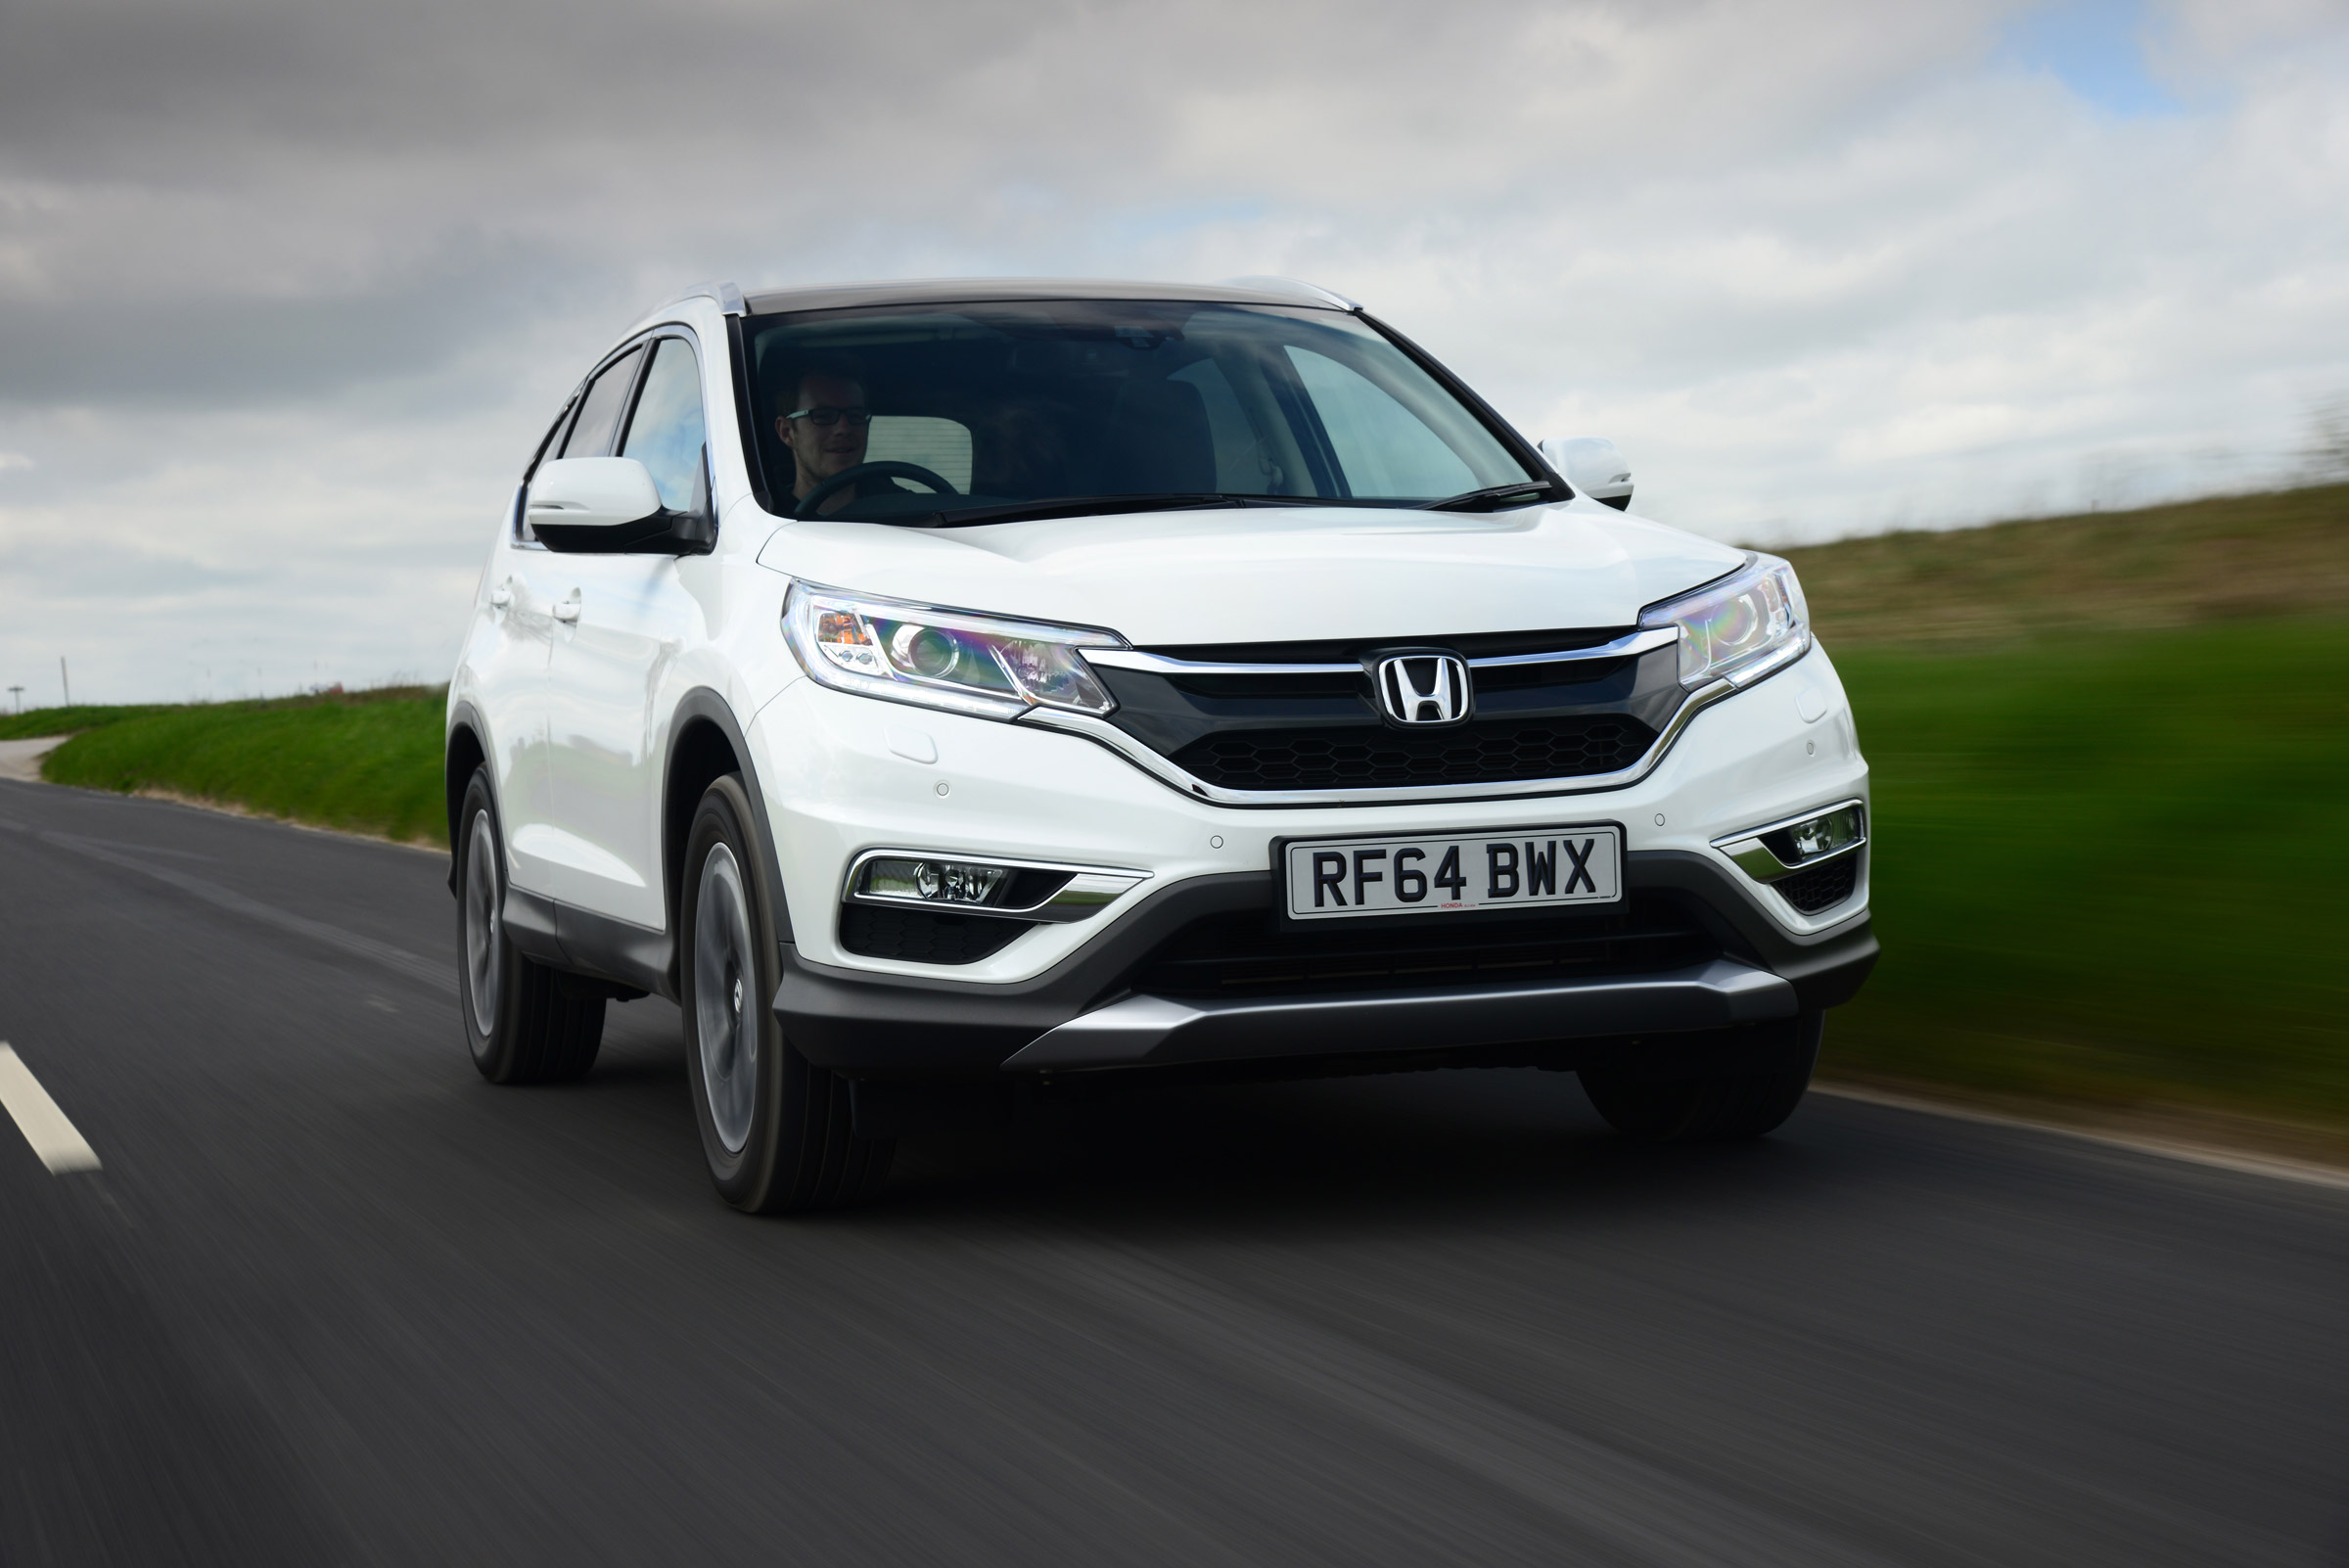 Honda CRV 1.6 diesel automatic review Auto Express